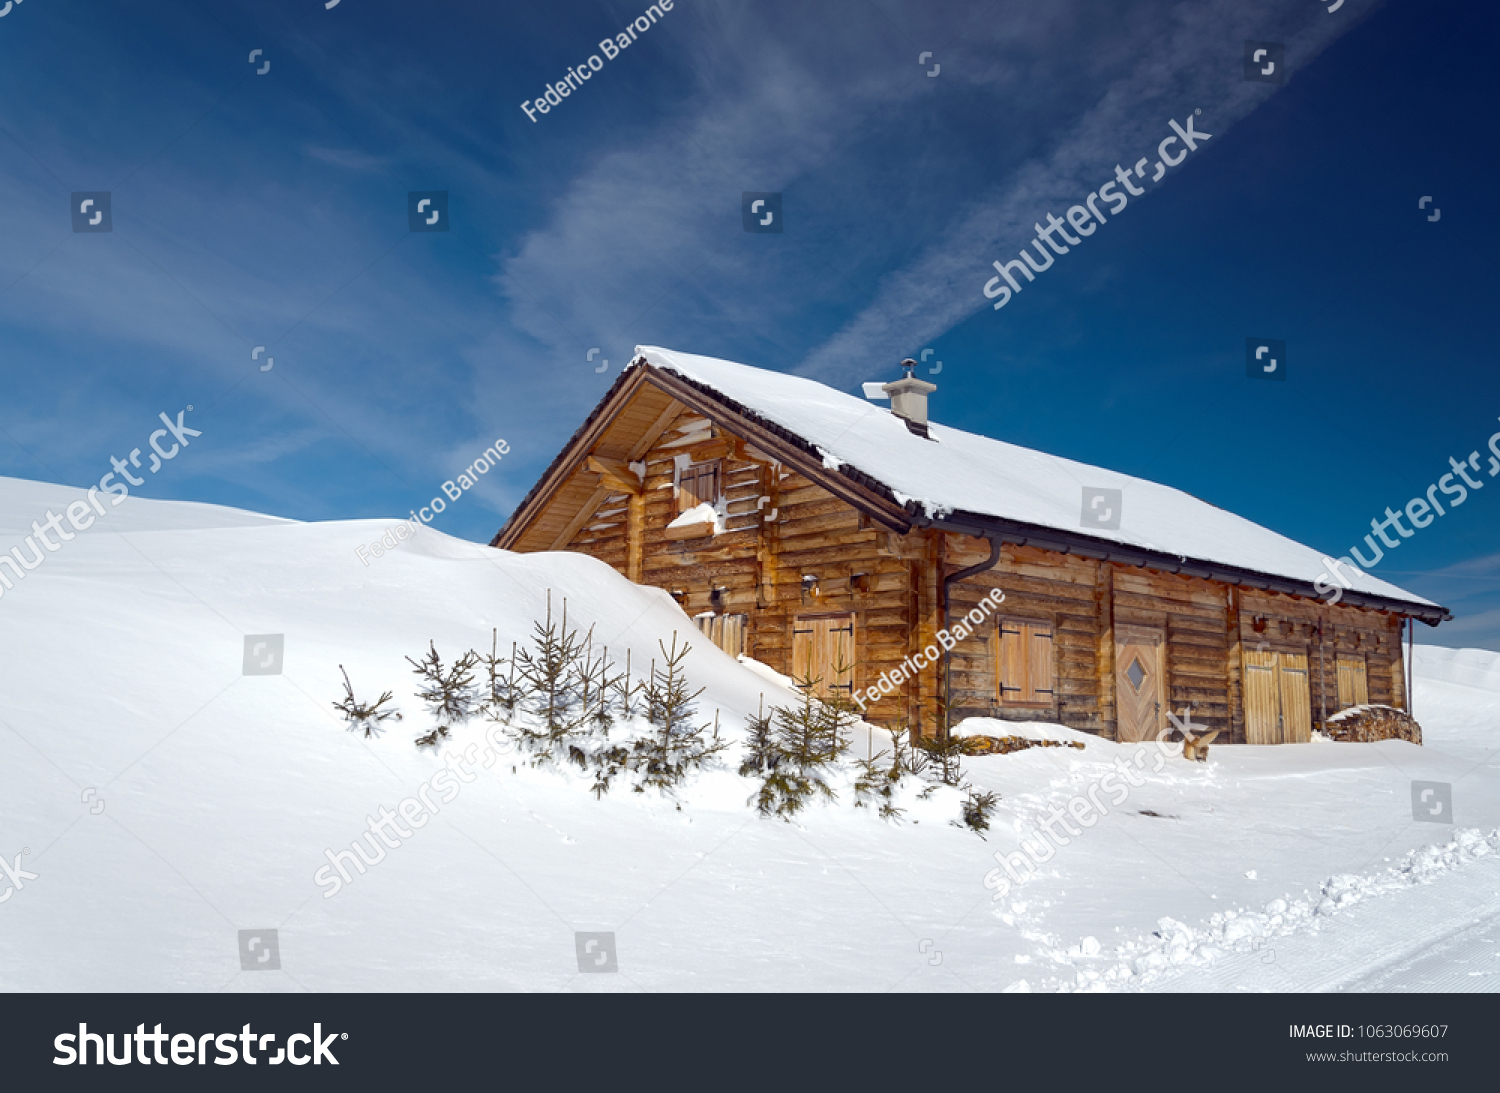 stock-photo-alpine-chalet-surrounded-by-